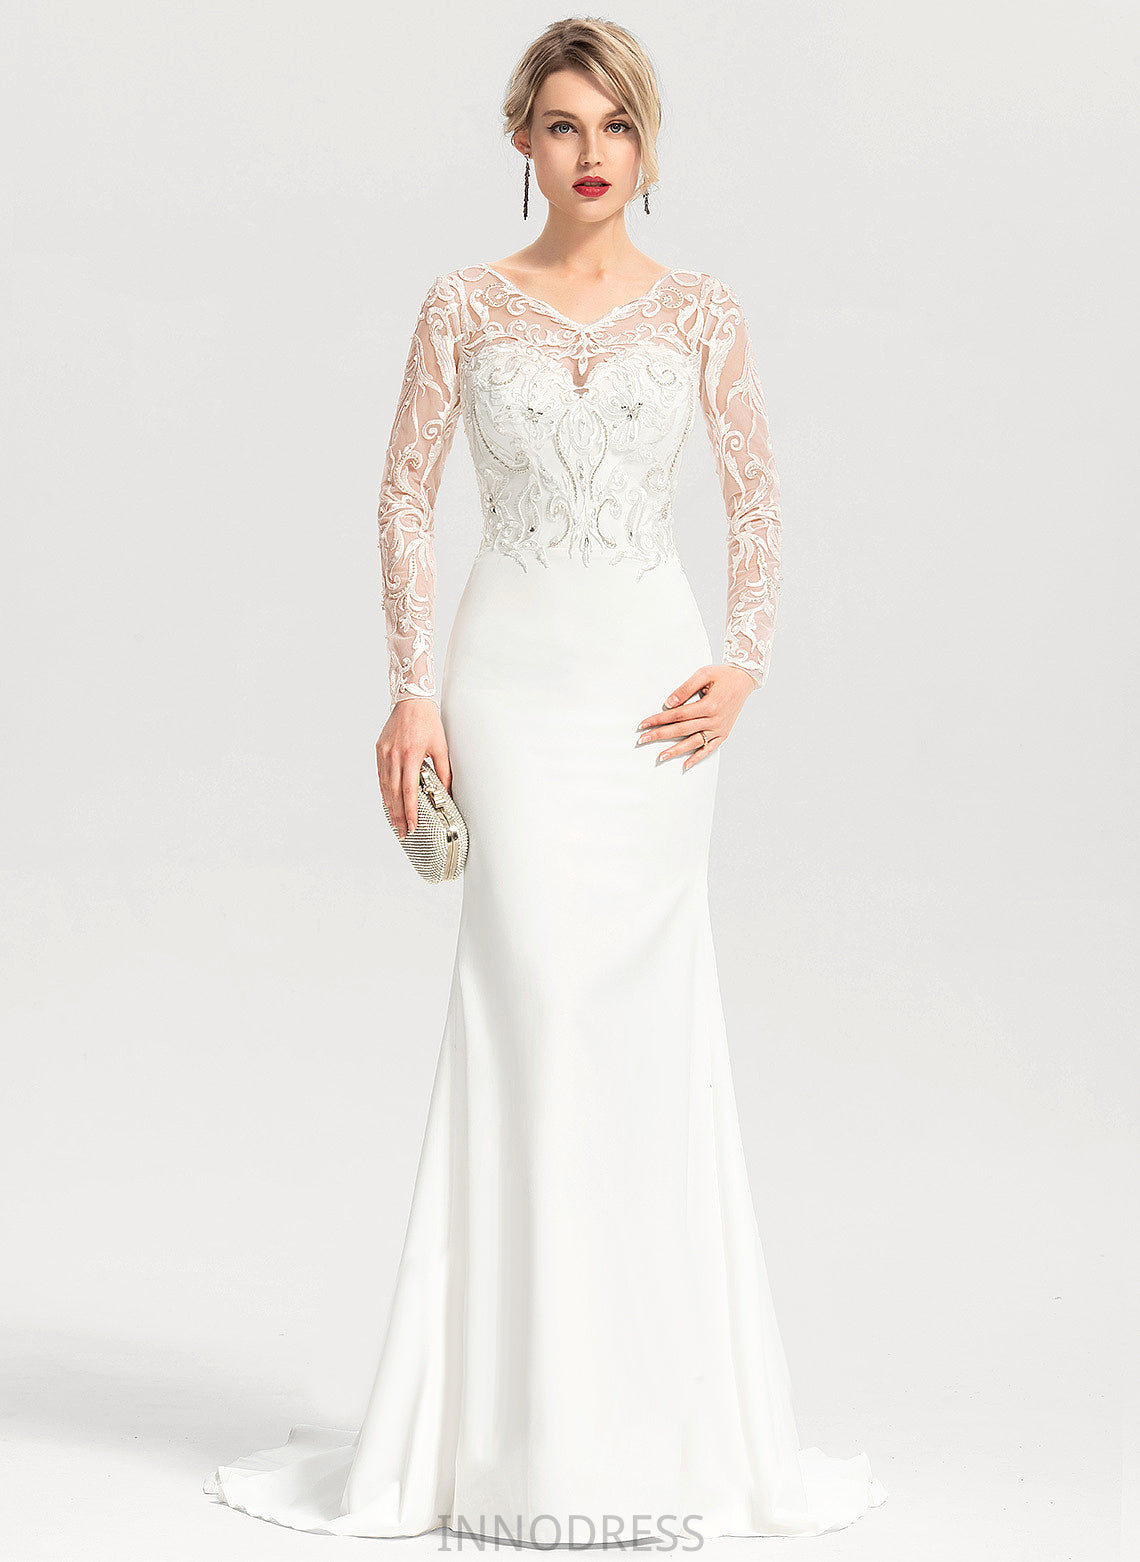 Gertrude Stretch Sequins Dress Wedding Dresses Sweep With Trumpet/Mermaid Beading V-neck Lace Wedding Crepe Train